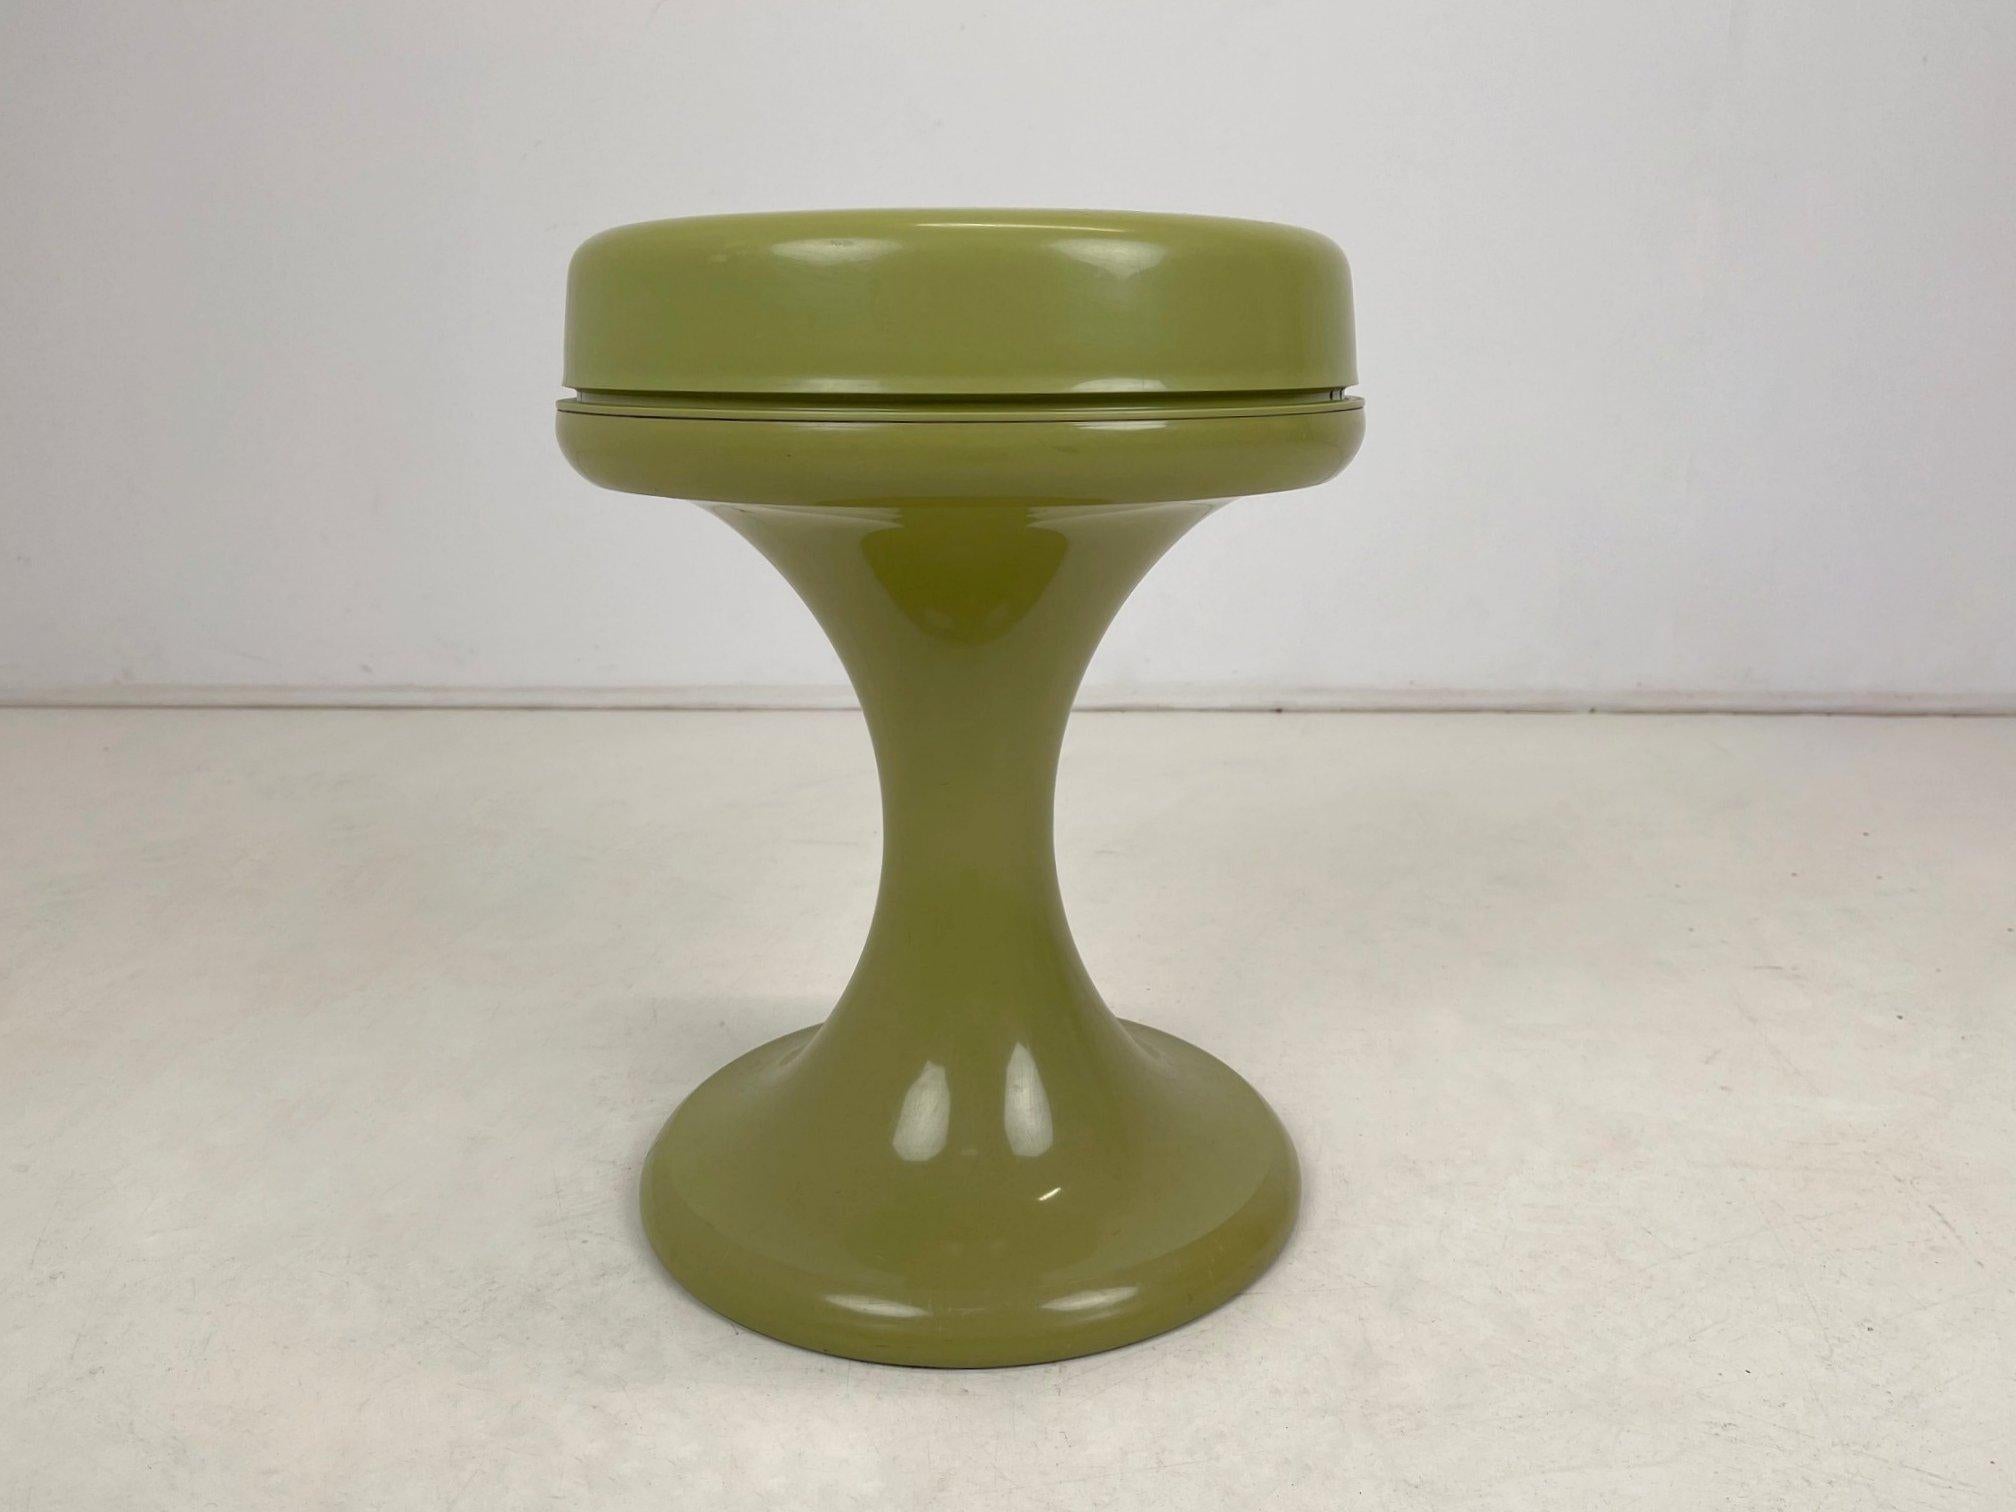 Space age plastic stool by EMSA, made in West Germany in the 1970's. The upper part is removable and it can be turned into a side or bedside table.